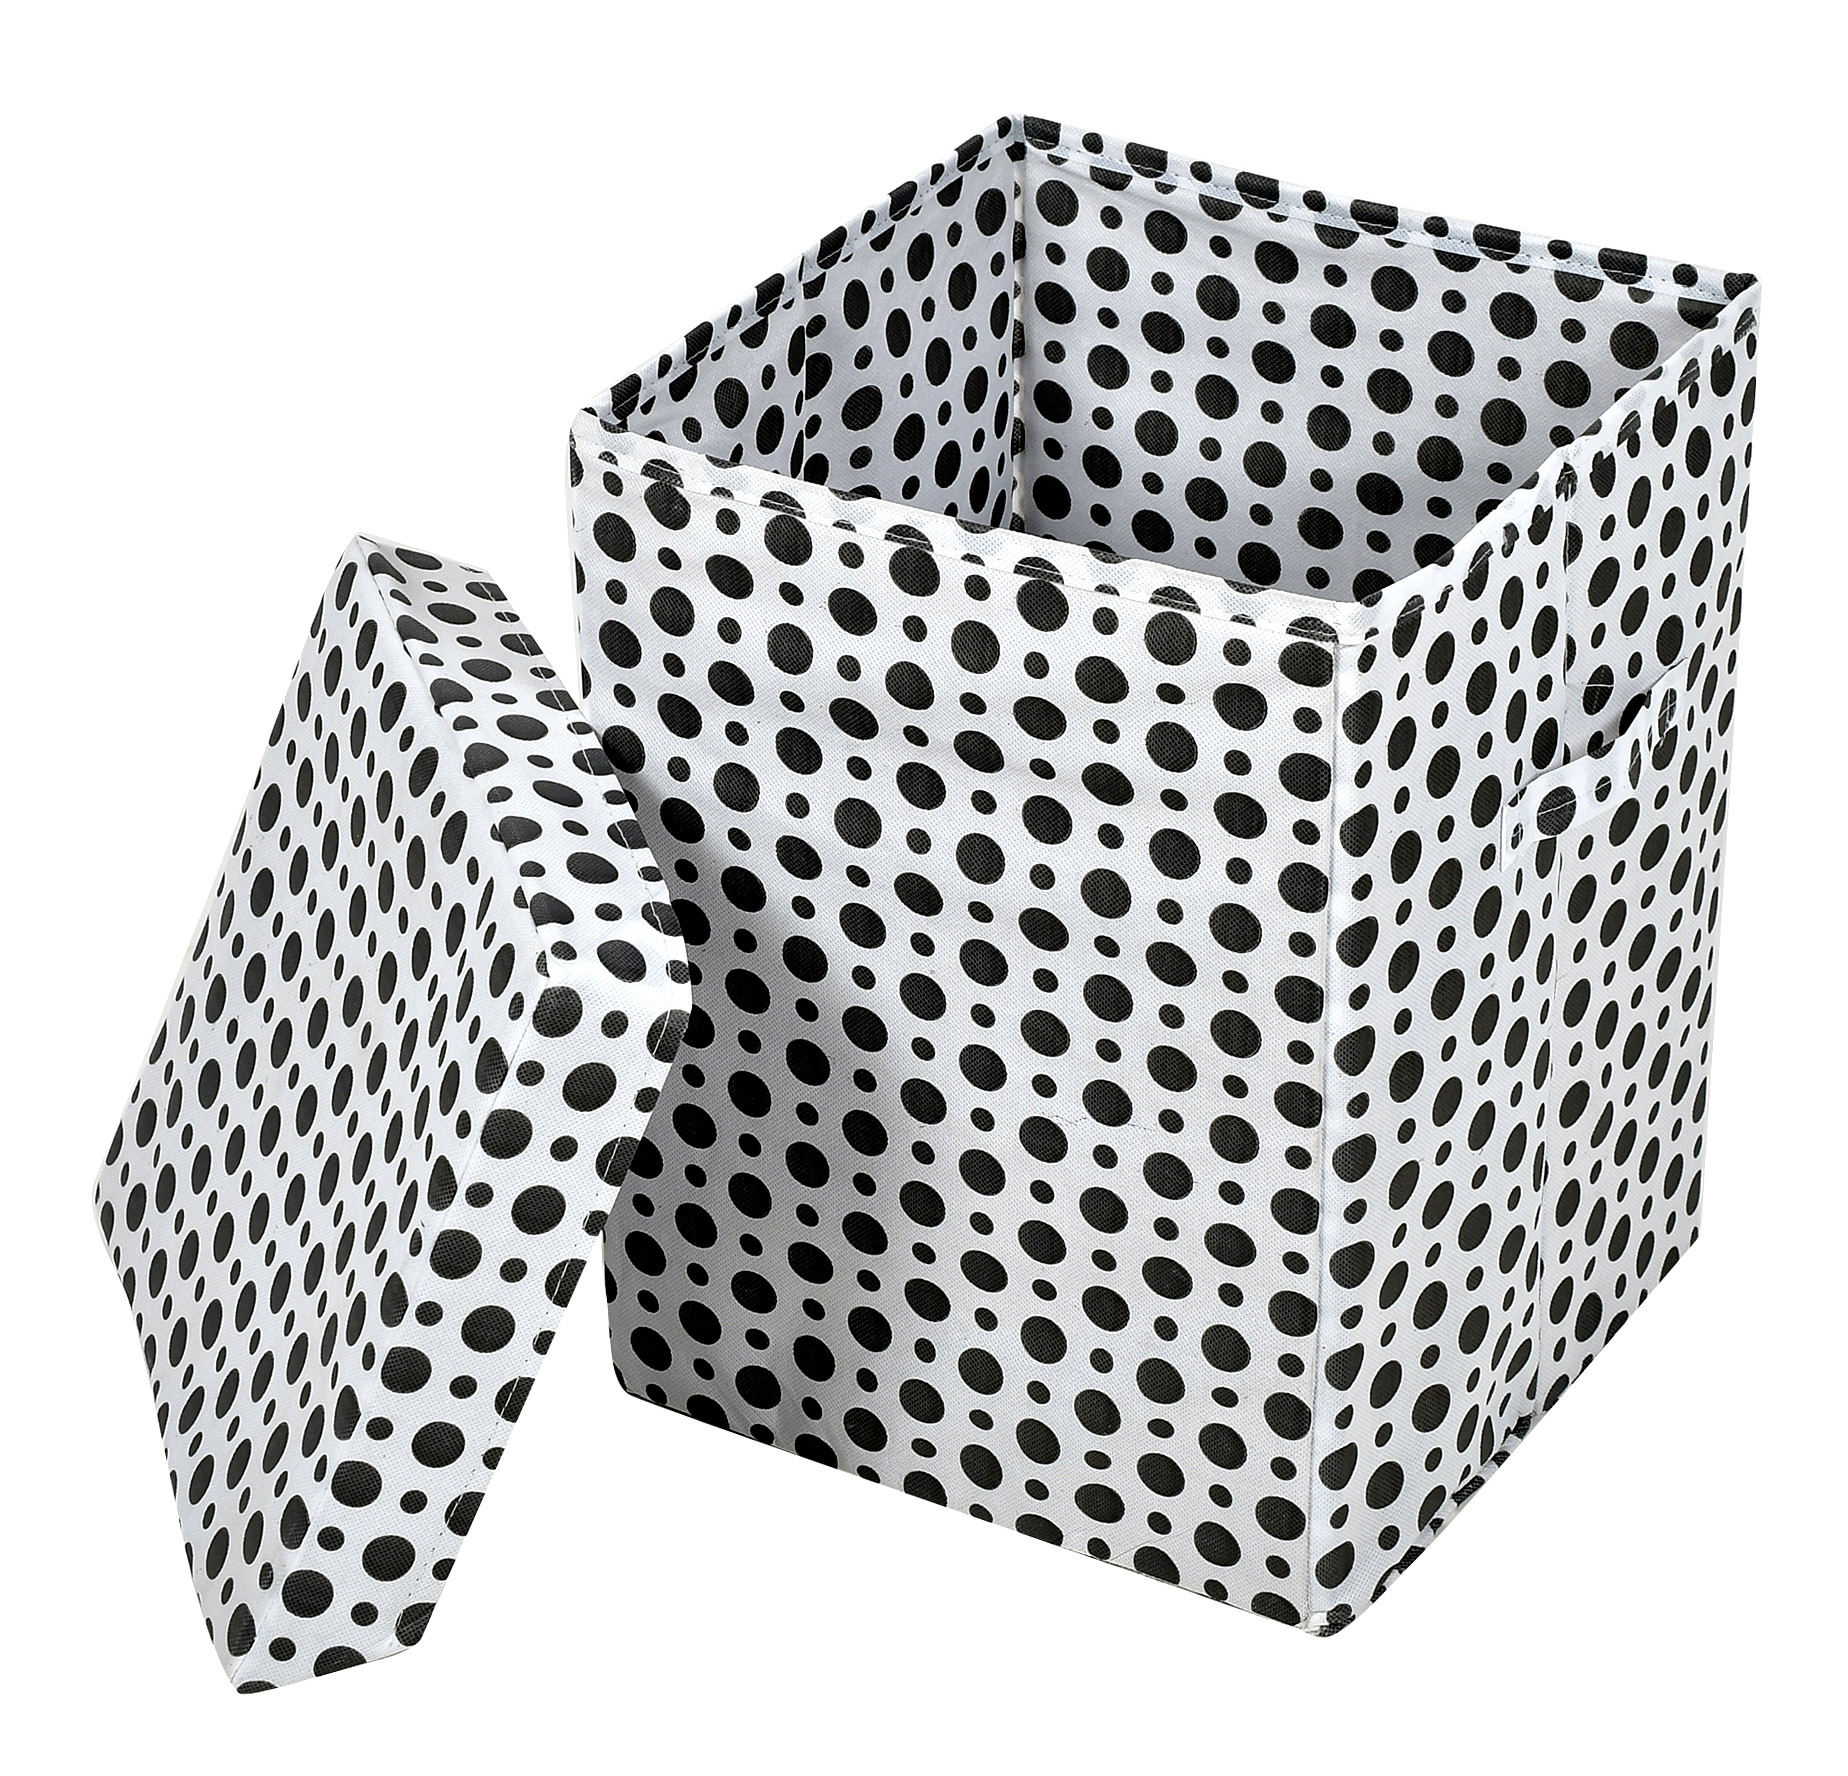 Kuber Industries Dot Printed Non-Woven Foldable Large Laundry basket/Hamper With Lid & Handles (White & Black)-44KM0201